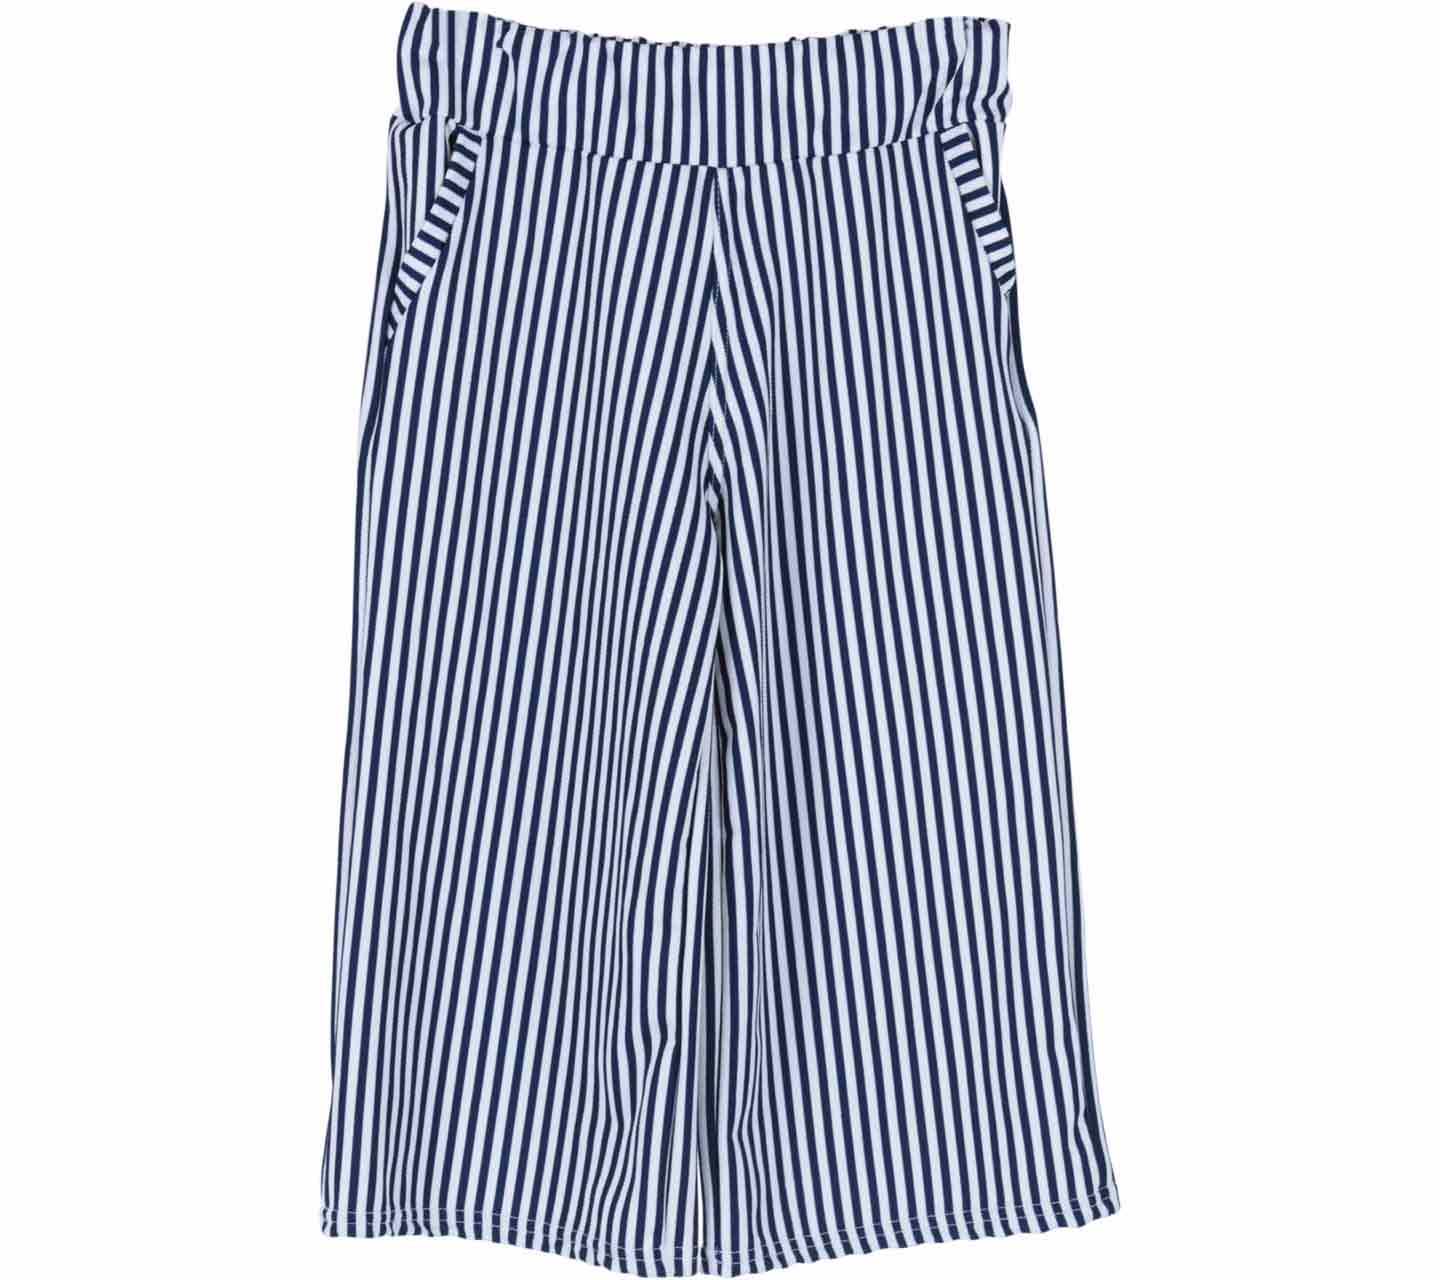 H&M Blue And White Stripes Pants